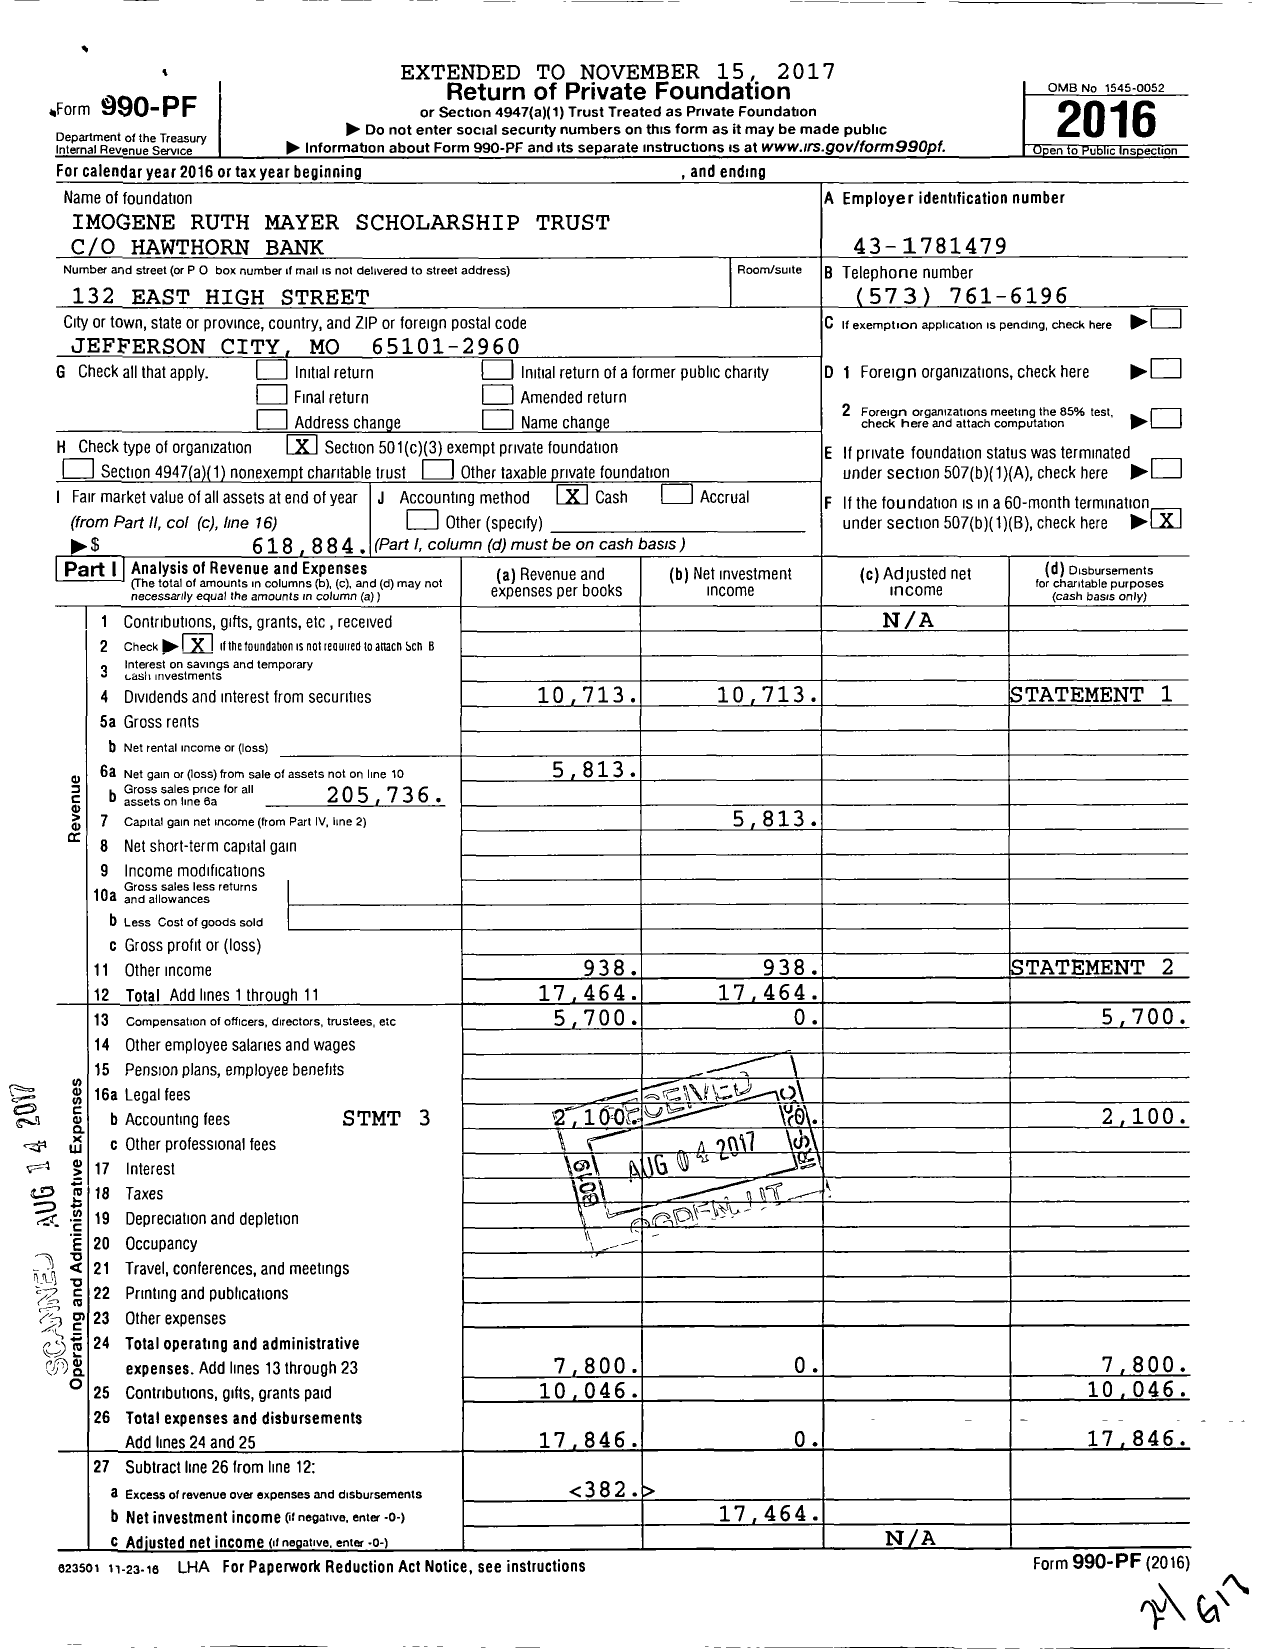 Image of first page of 2016 Form 990PF for Imogene Ruth Mayer Scholarship Trust